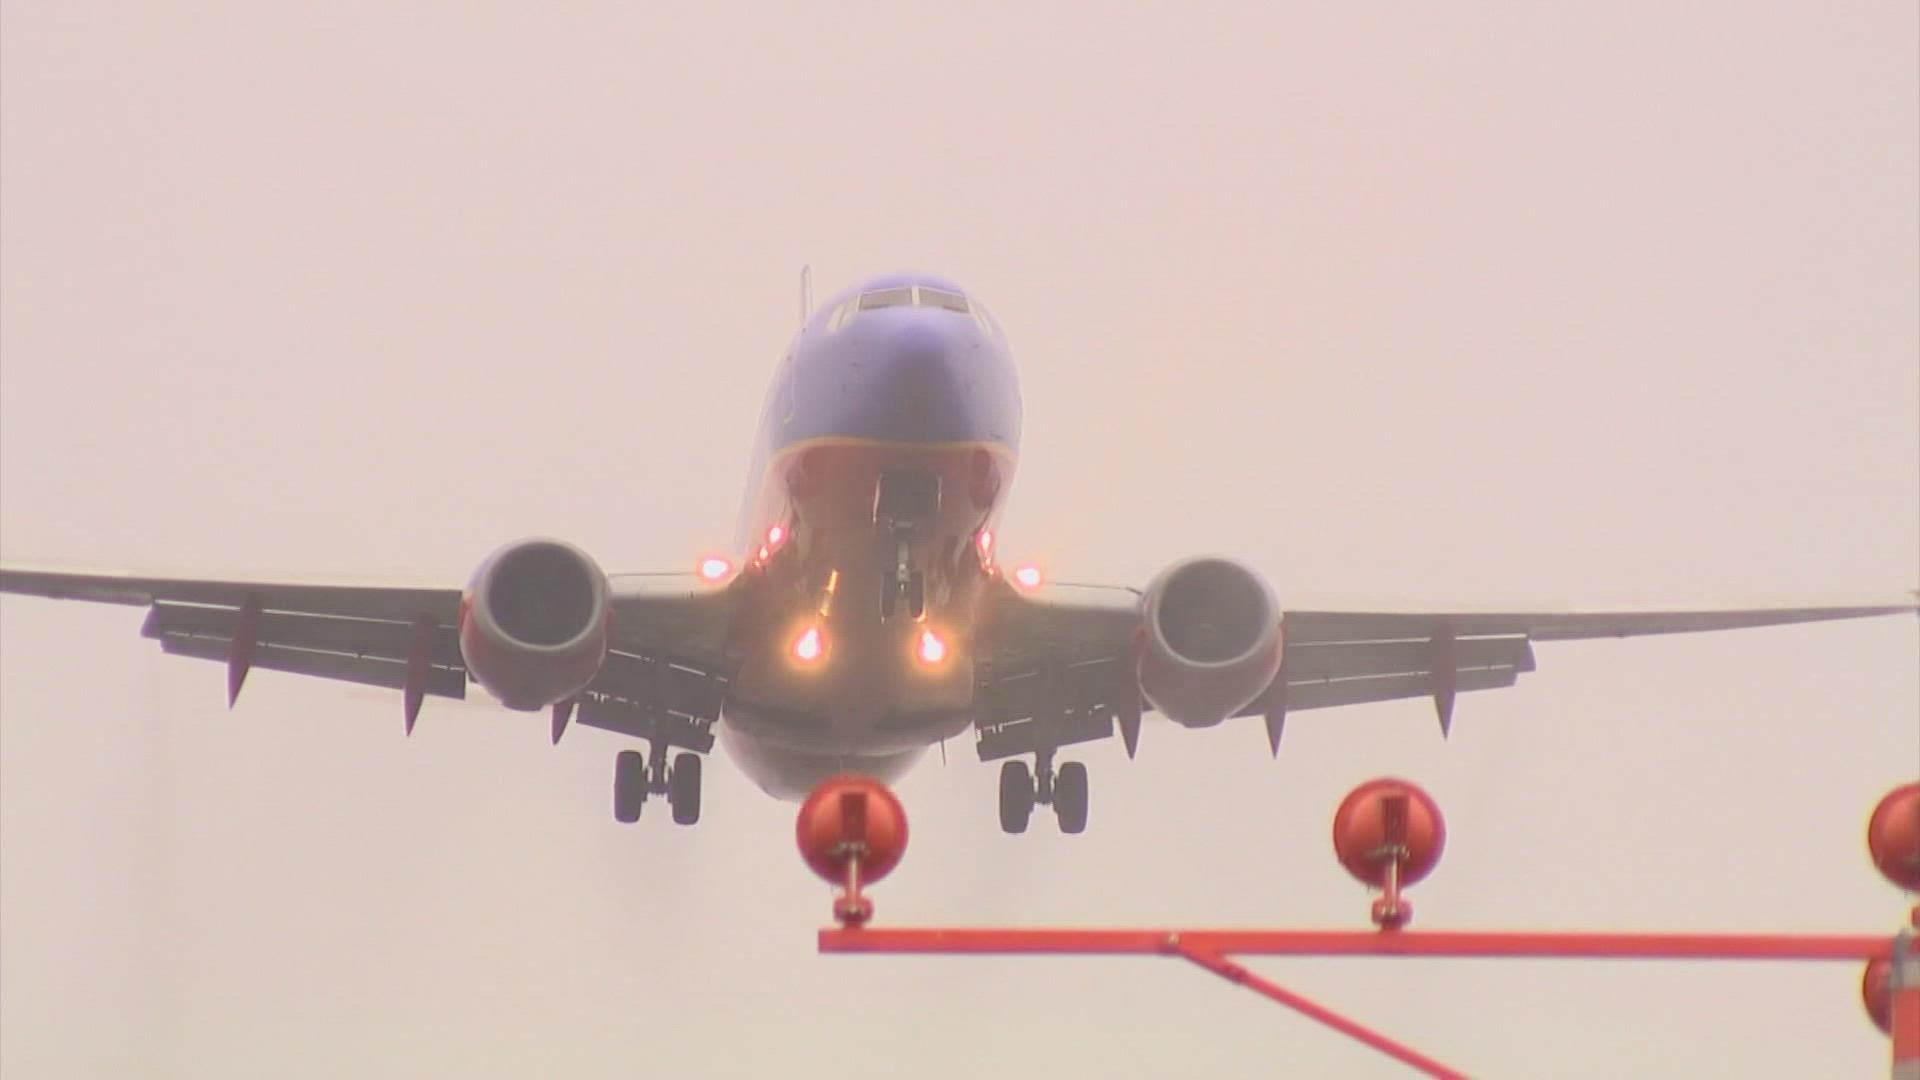 The impact to Sea-Tac airport is minimal right now, but some flights have been canceled across the country due to impacts from 5G cellphone service.